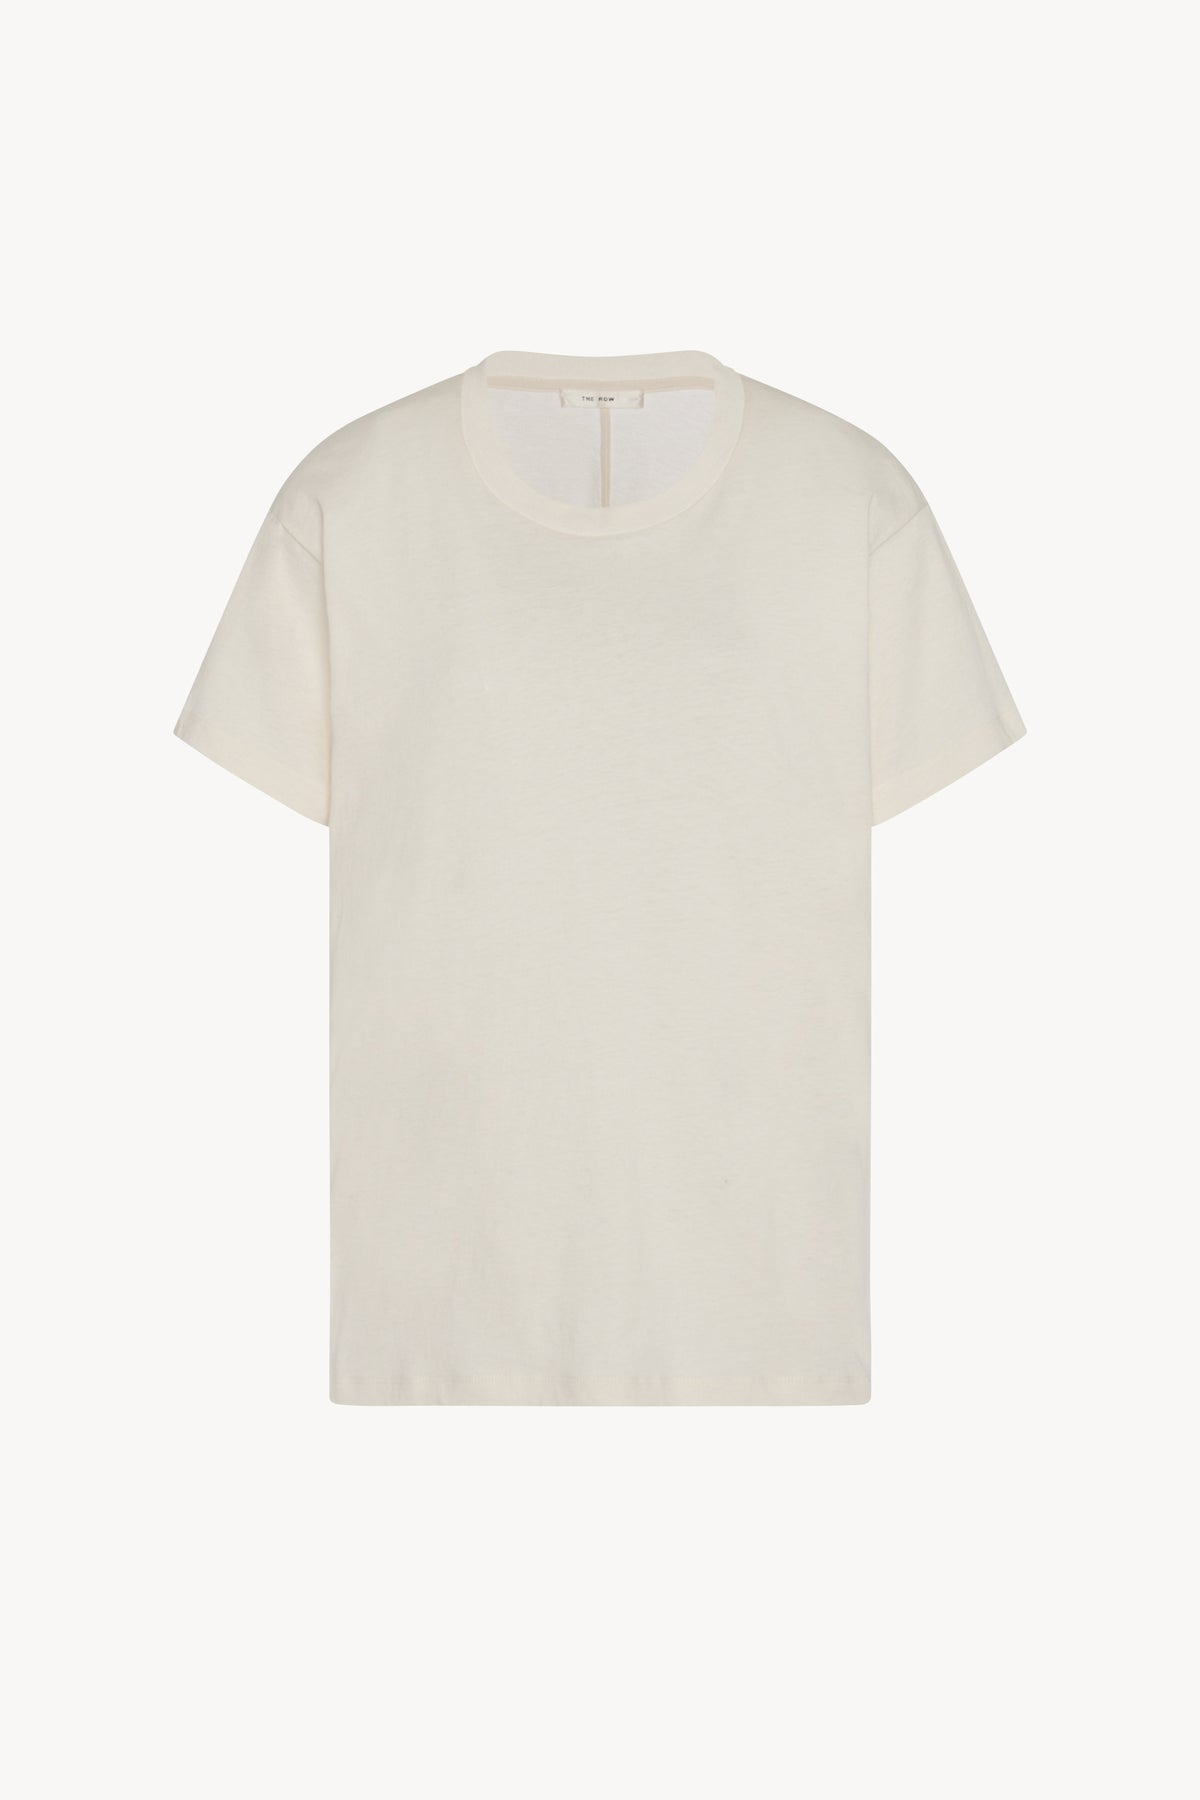 Blaine Top in Cotton